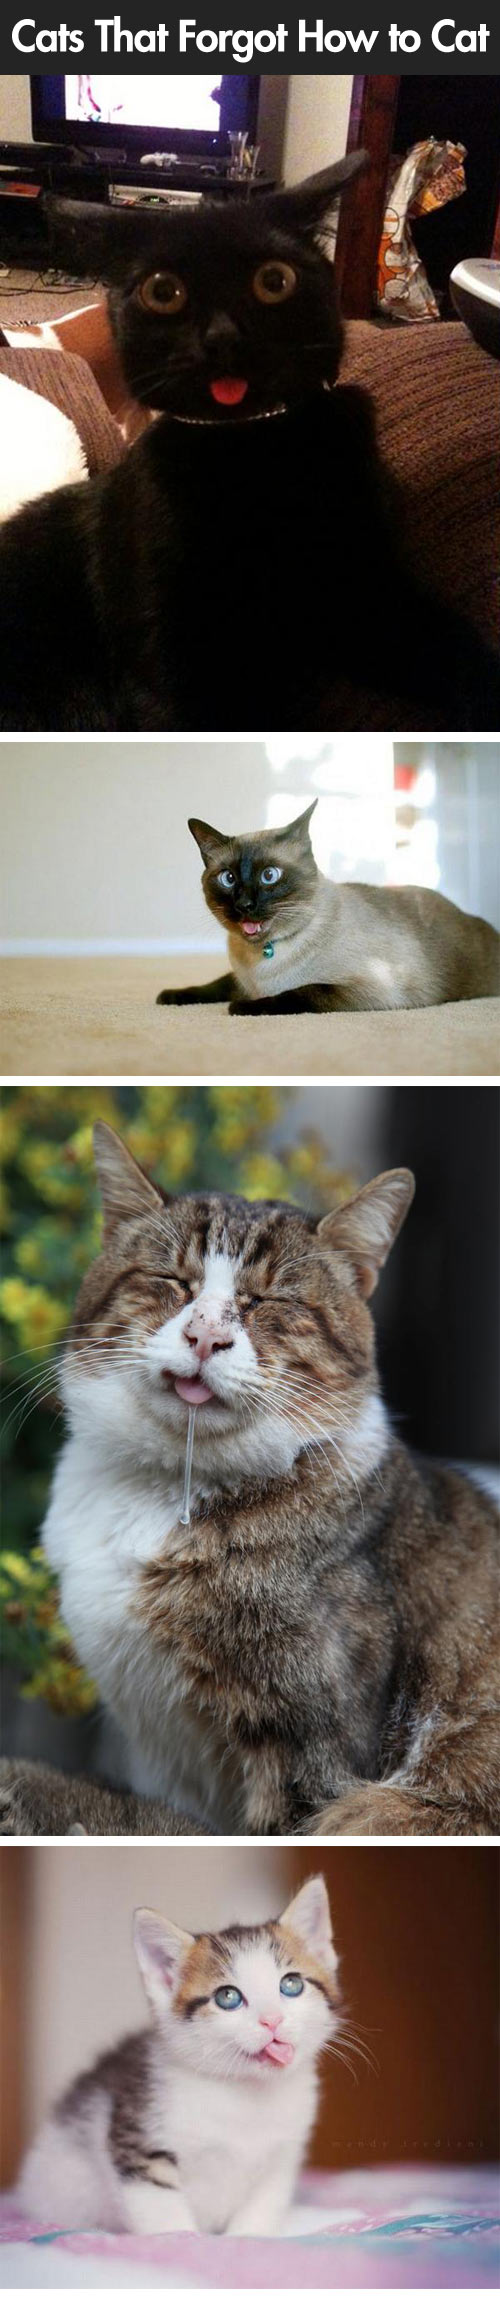 funny-cats-forgot-tongue-out